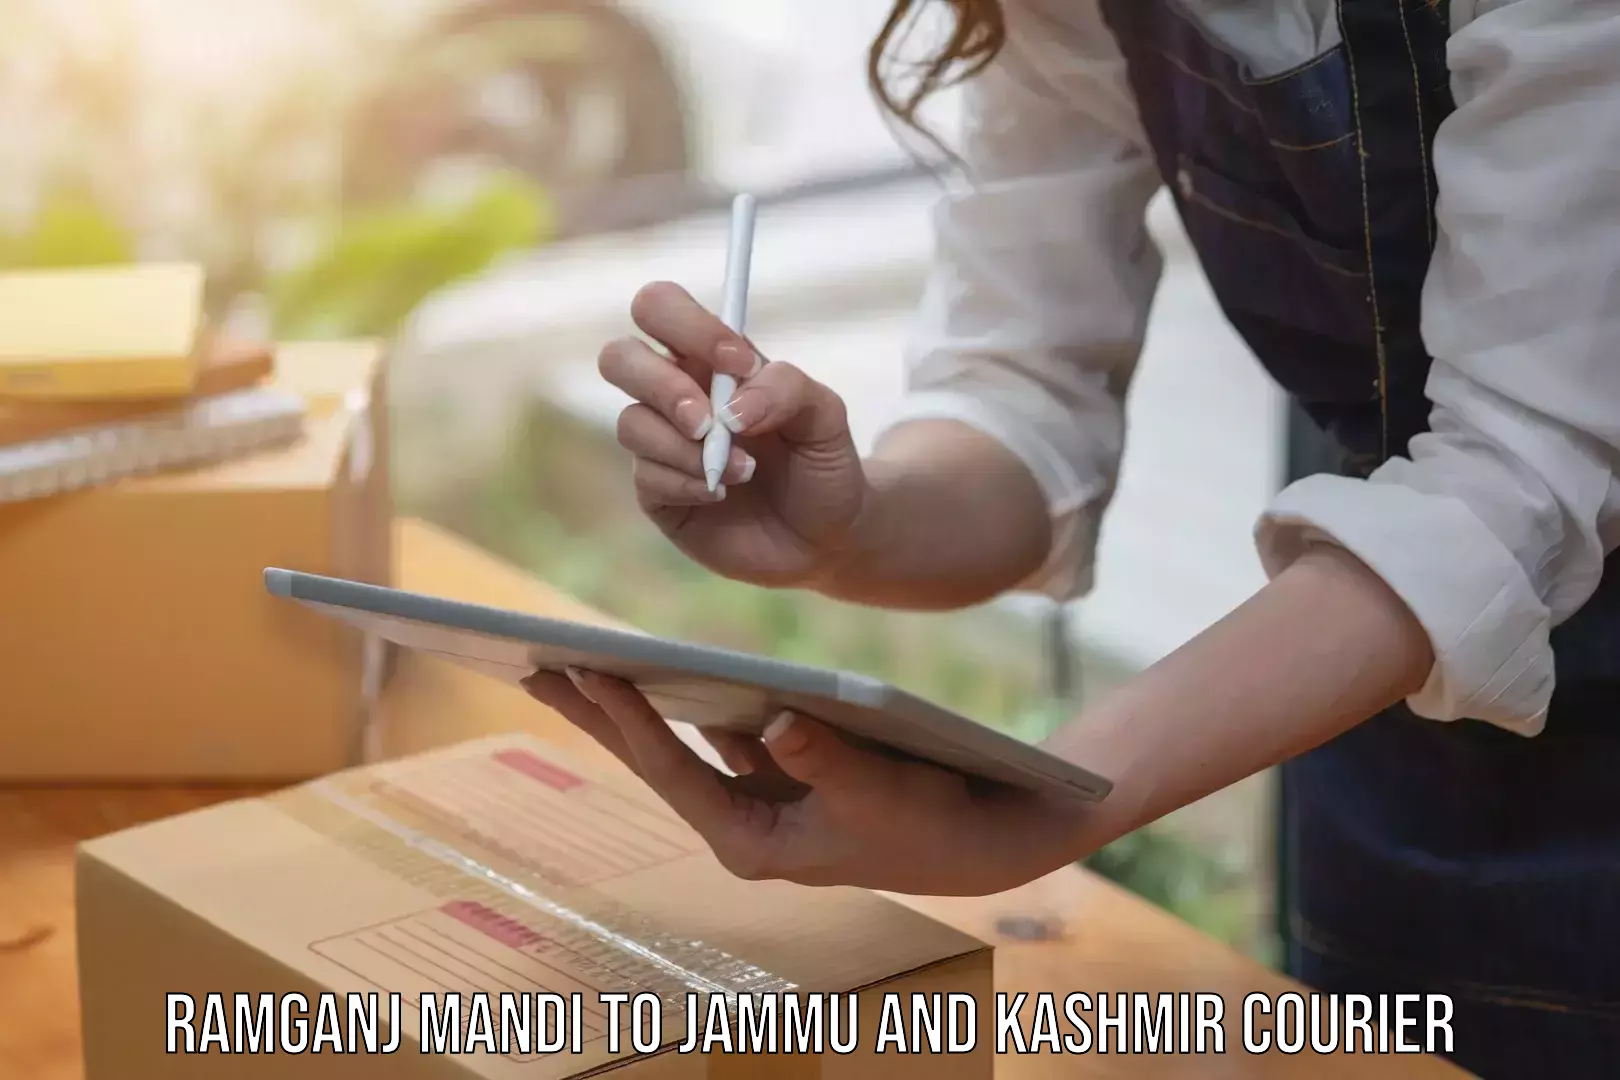 Easy access courier services Ramganj Mandi to Kargil